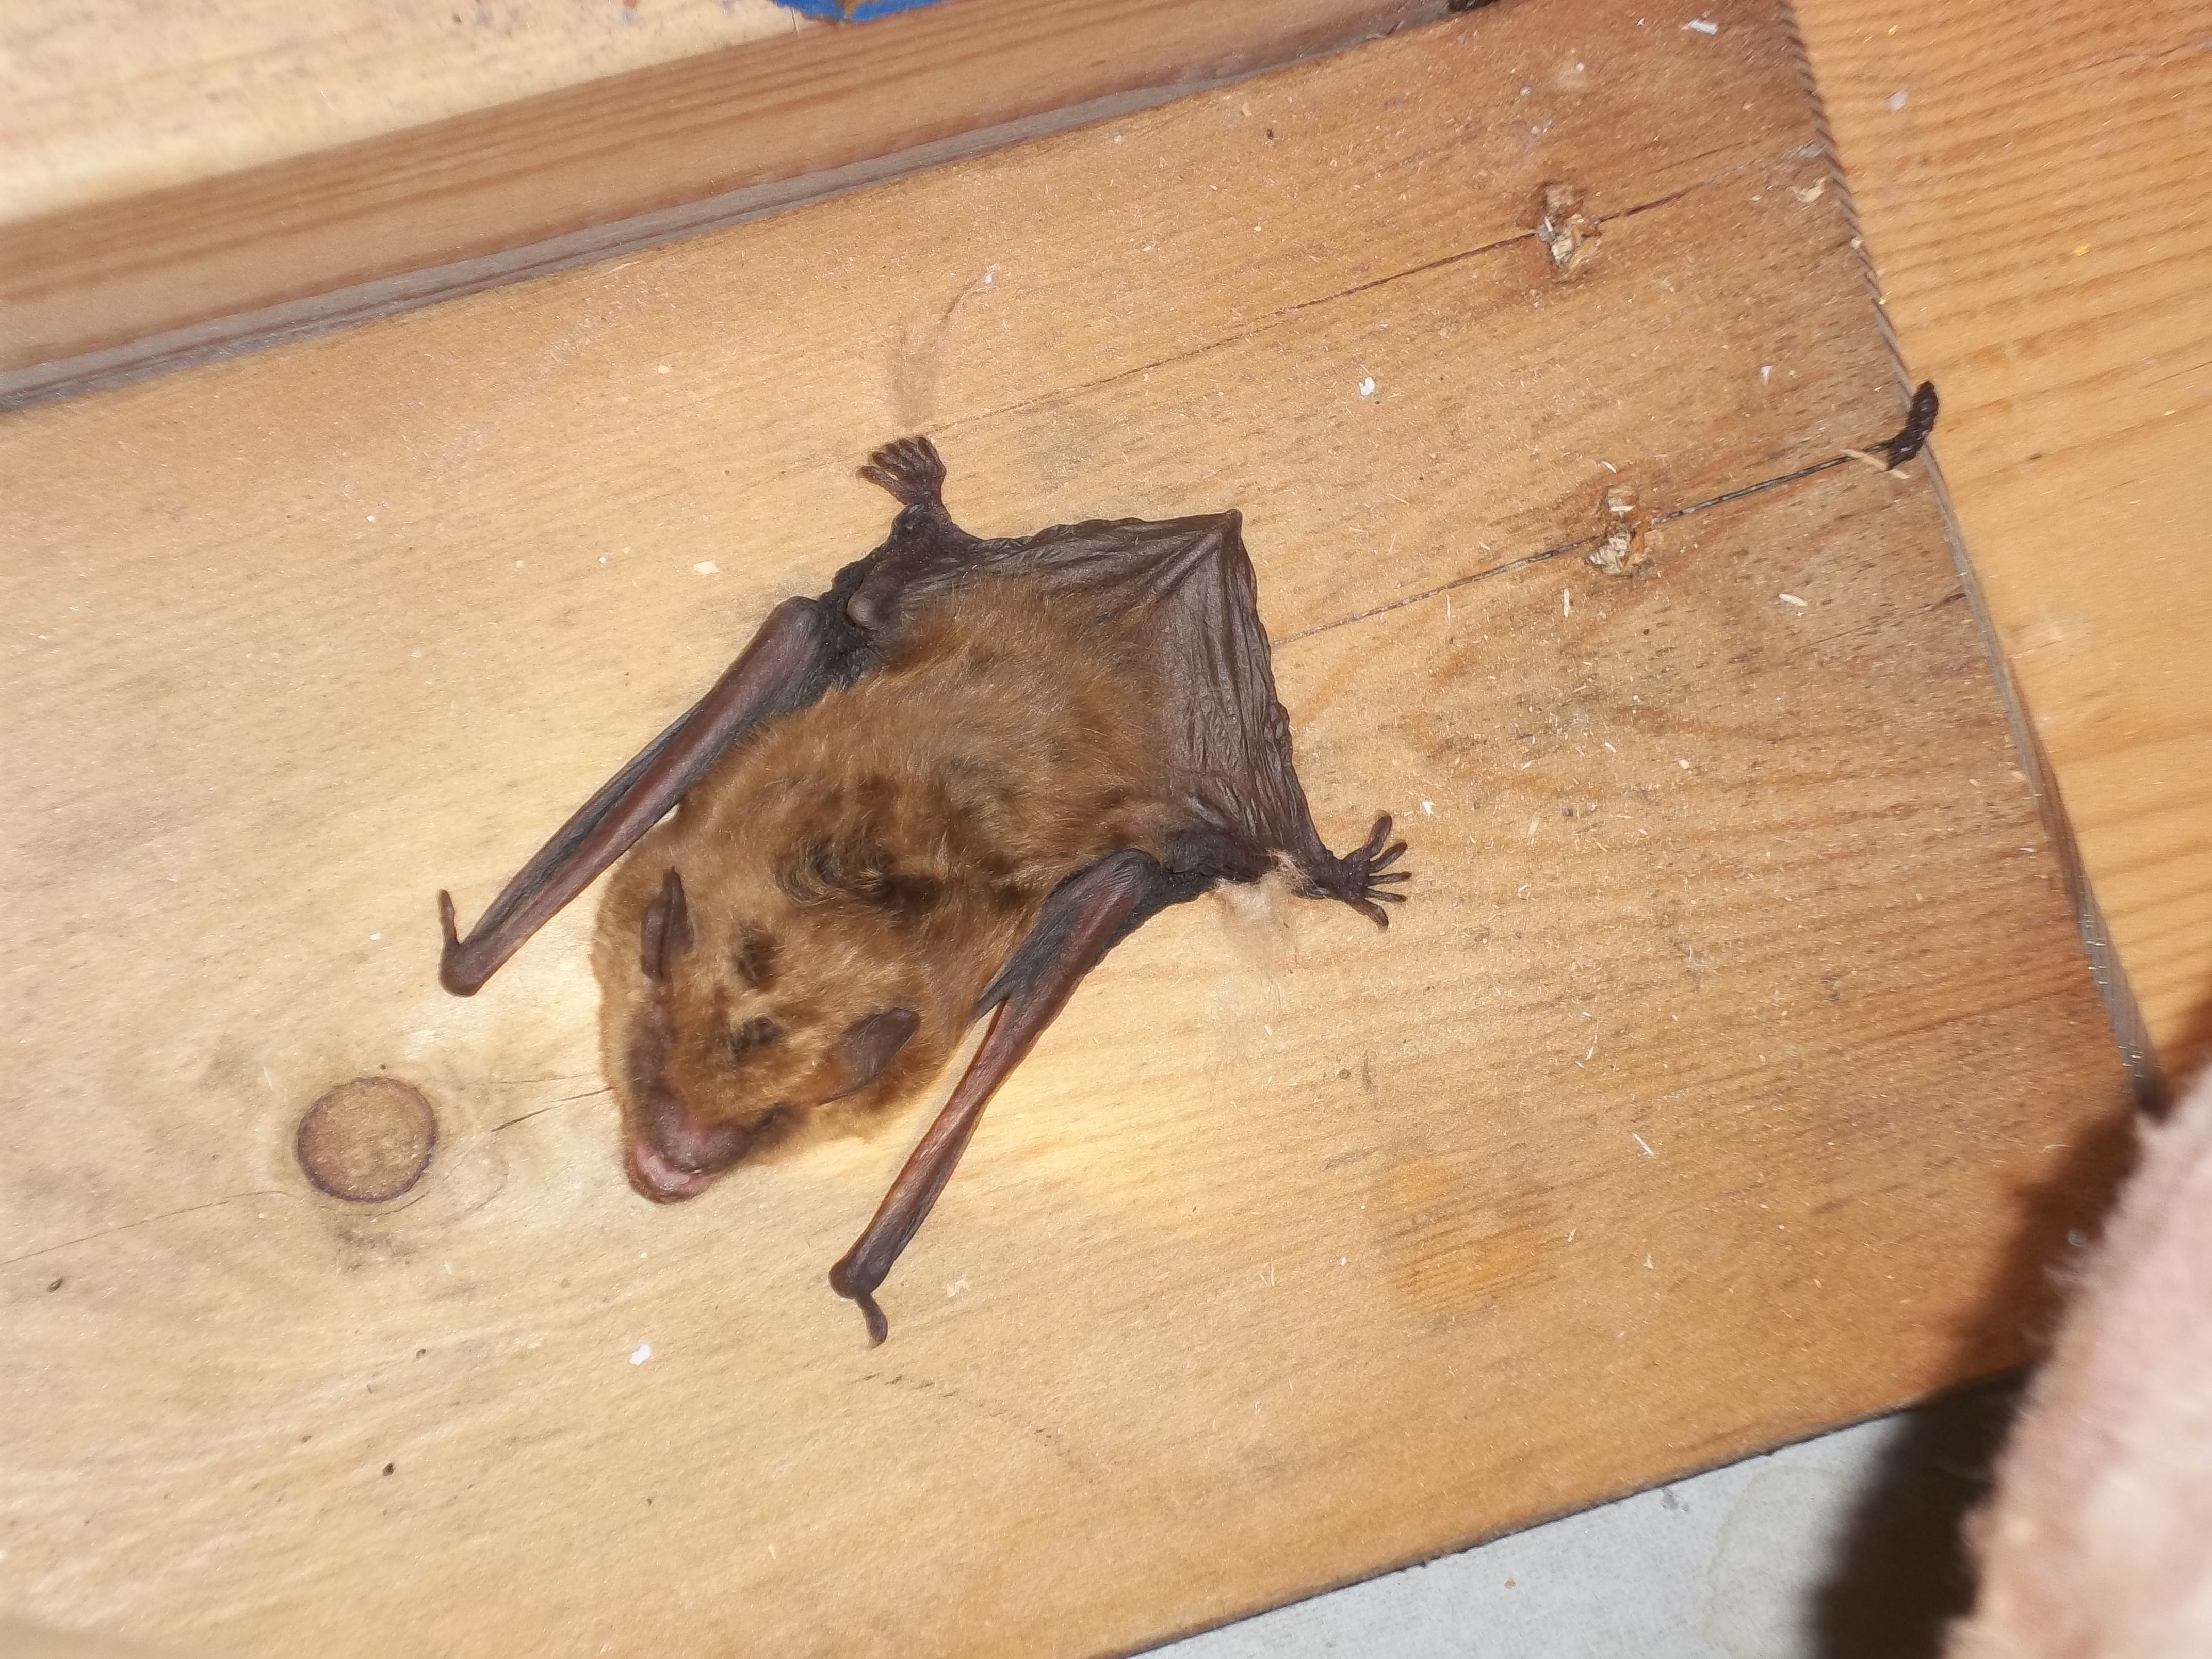 How can you get rid of bats in winter?